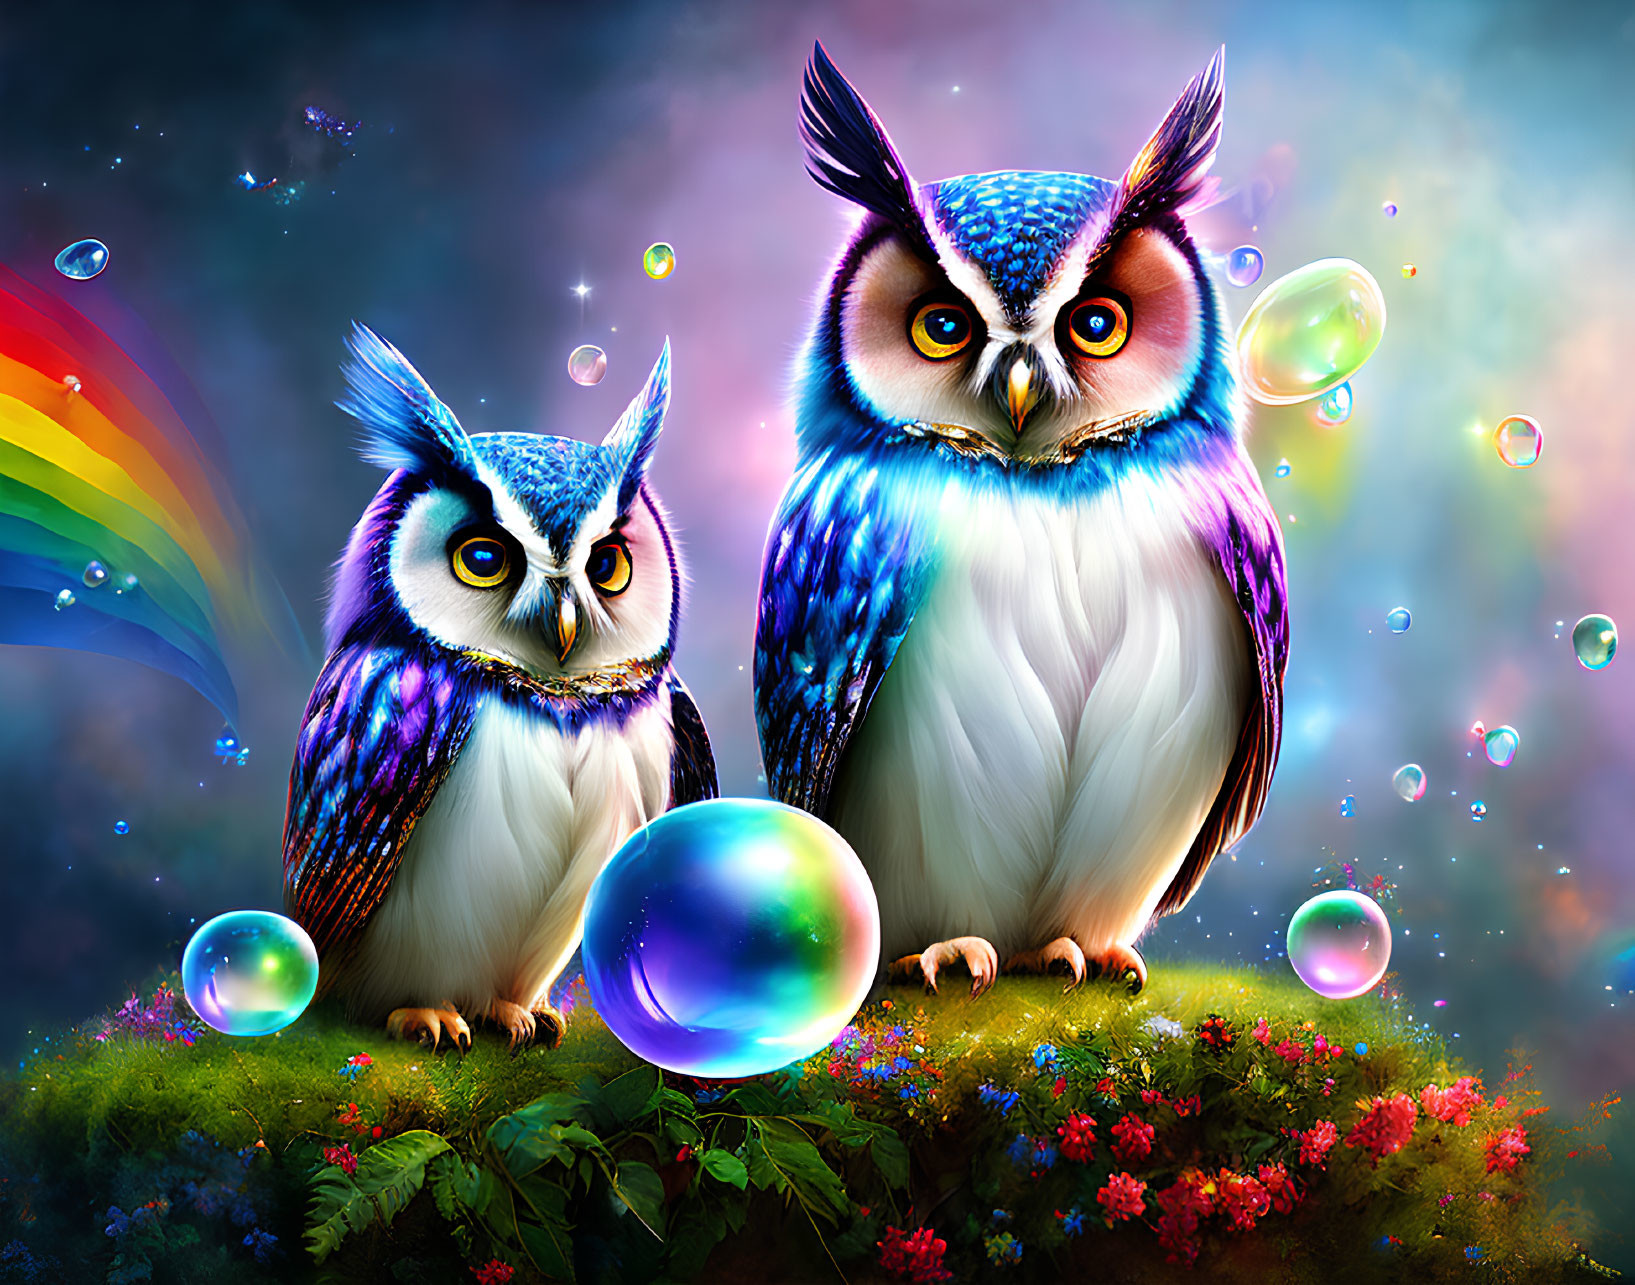 Colorful Illustrative Owls Surrounded by Bubbles and Flowers on Cosmic Rainbow Background